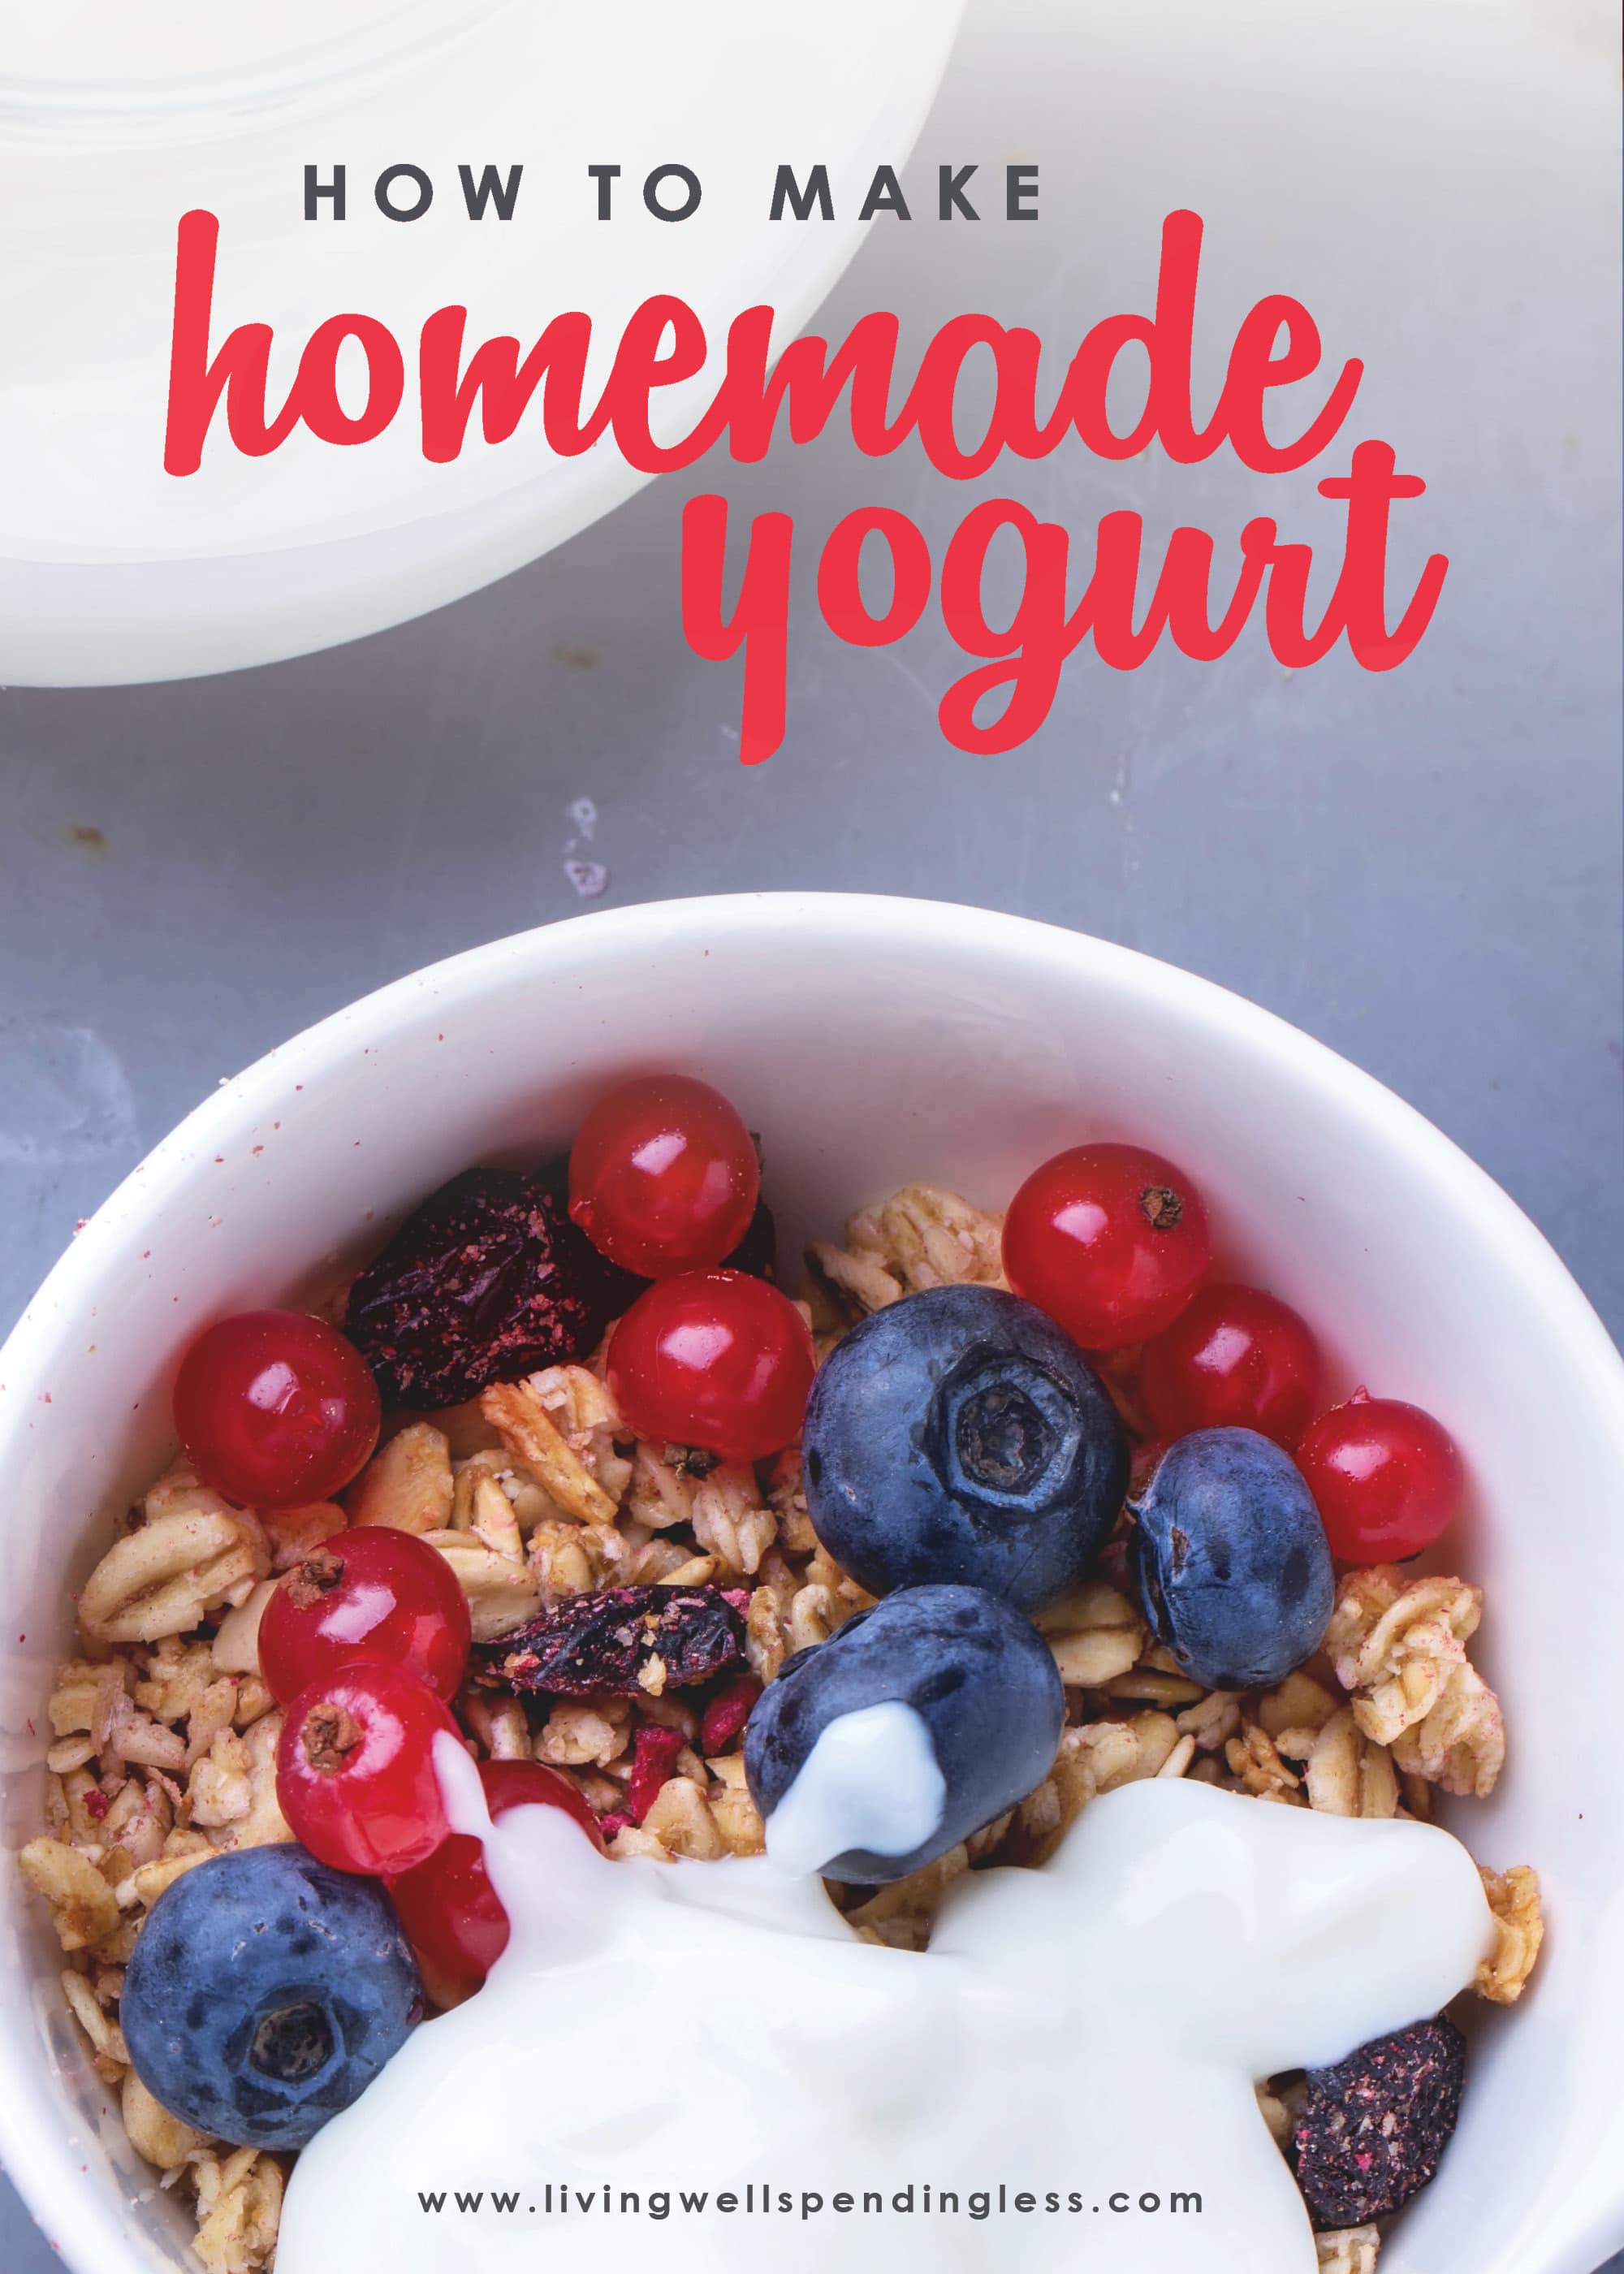 Looking for an easy and delicious homemade yogurt recipe? Here's how to make homemade yogurt in both a crockpot & Instant Pot - both super easy!